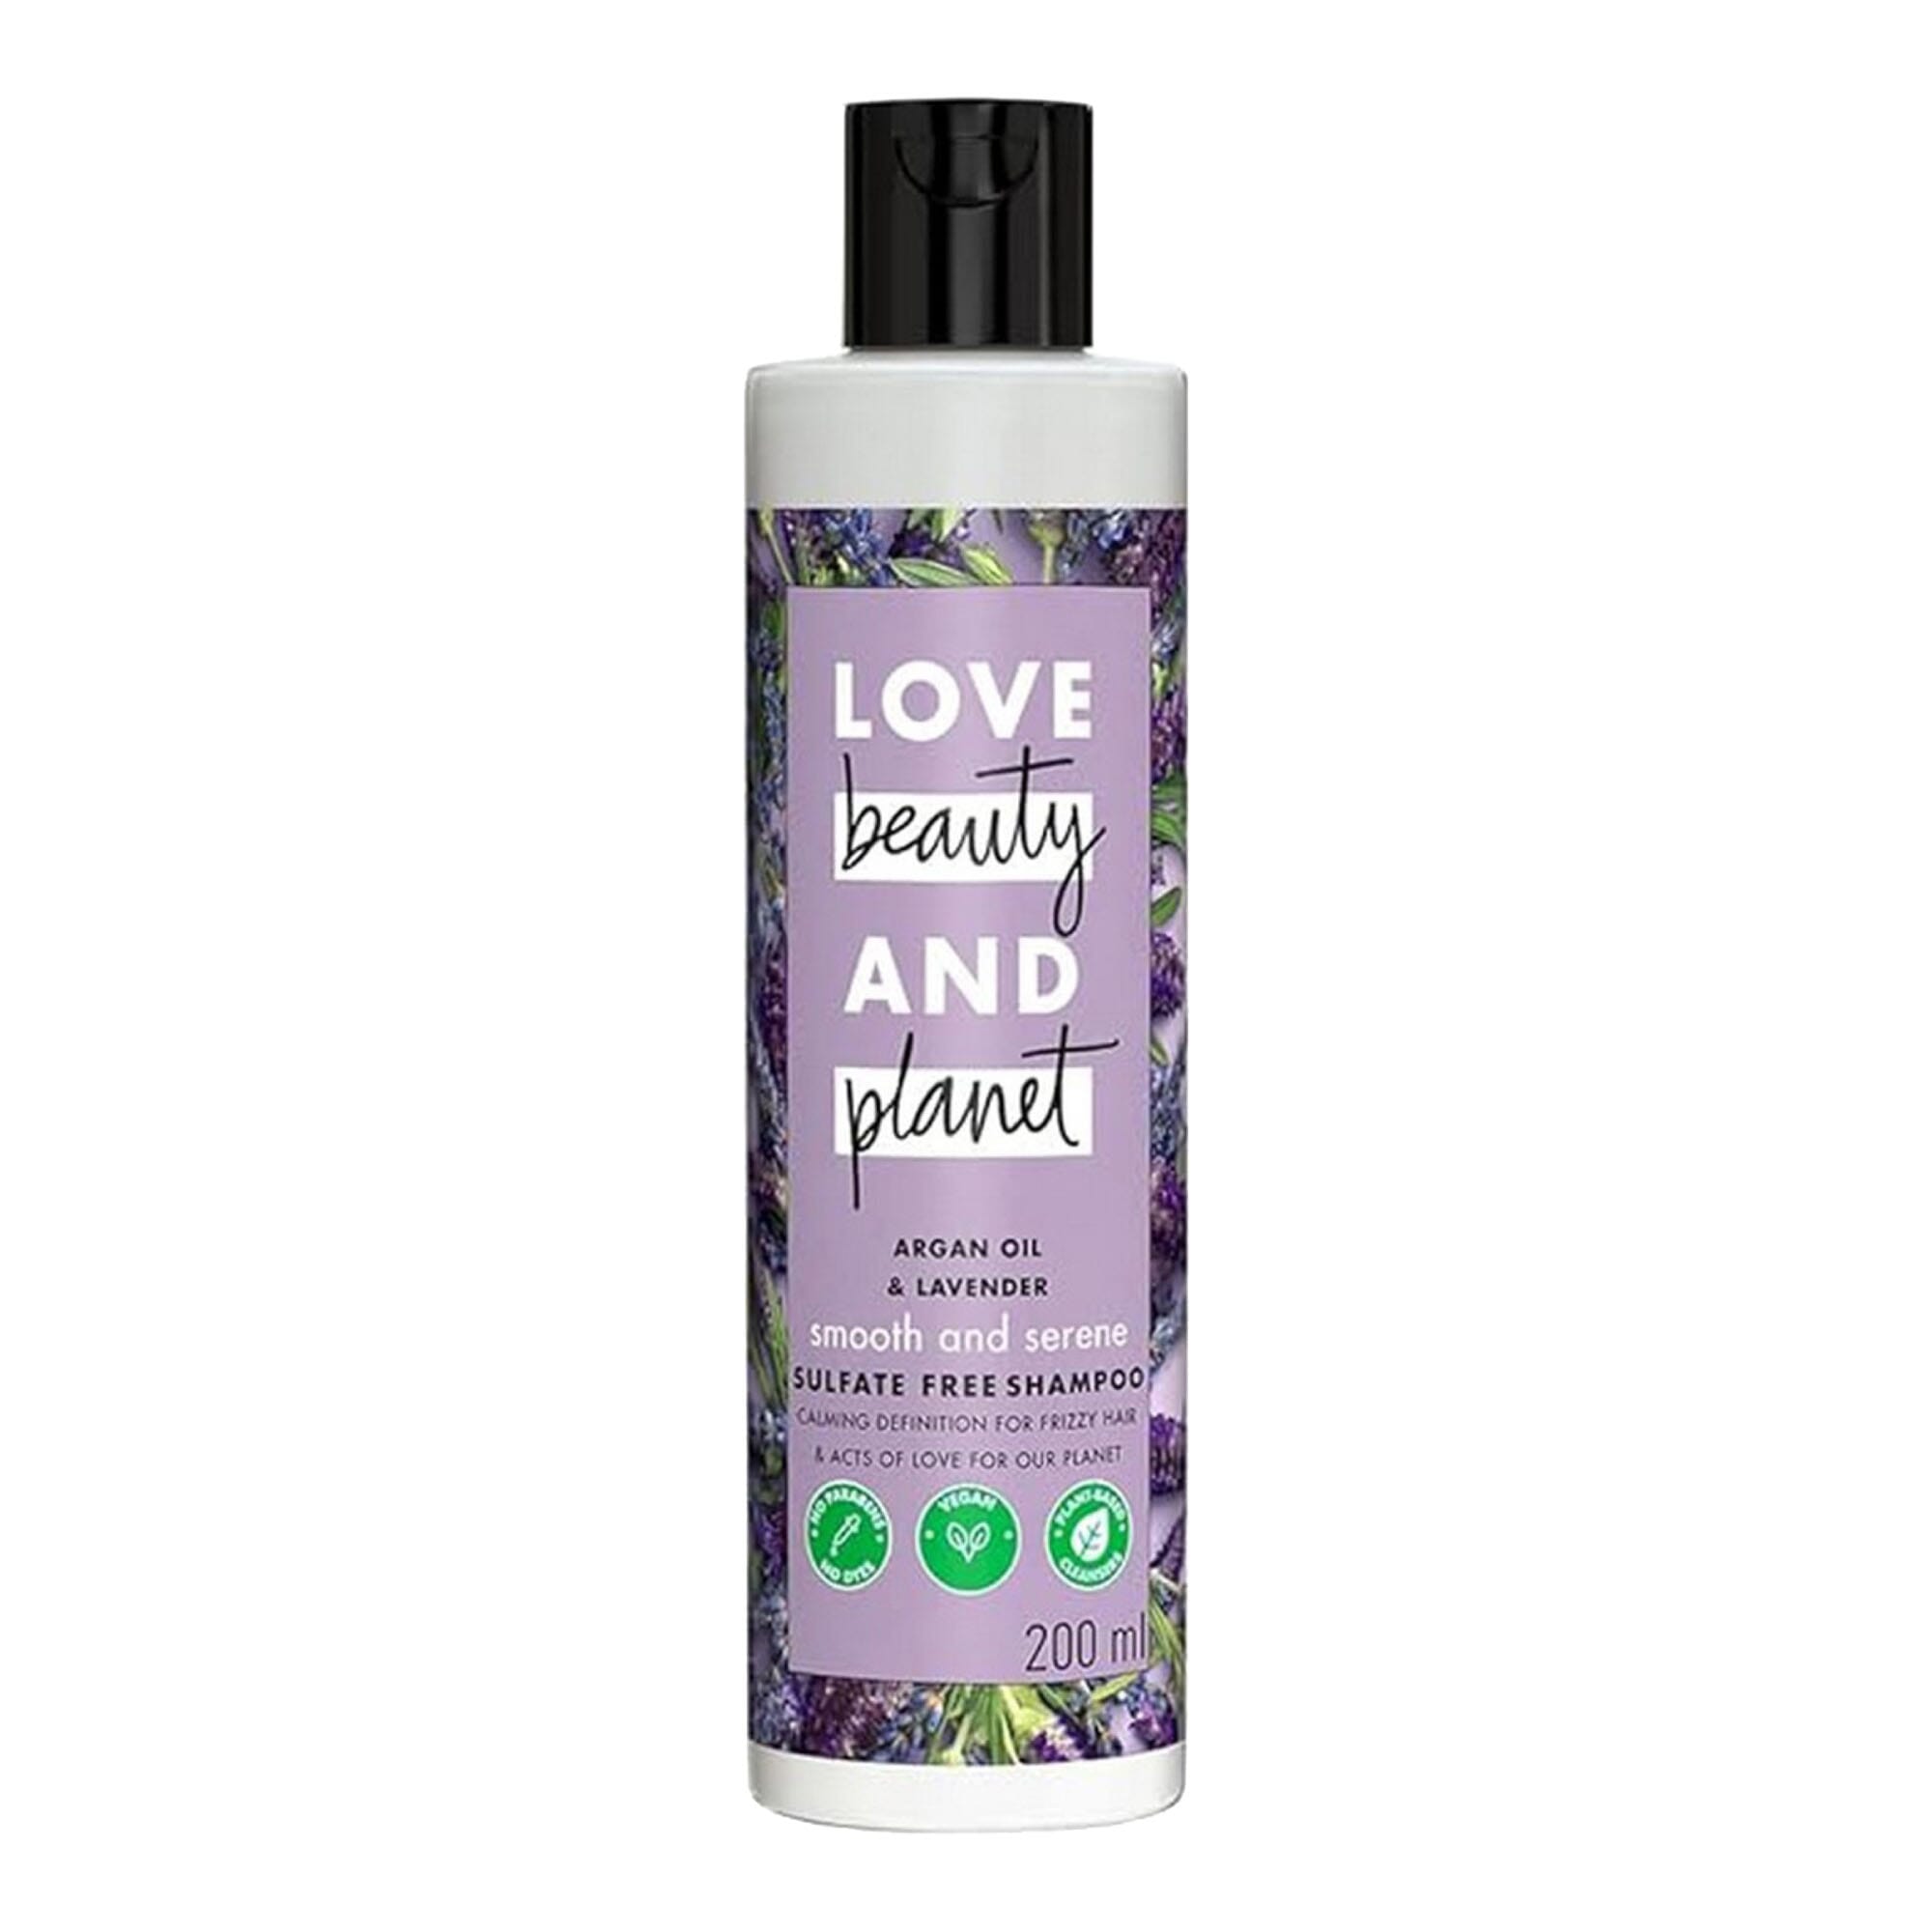 Love Beauty & Planet - Buy Love Beauty & Planet at Best Price in Nepal